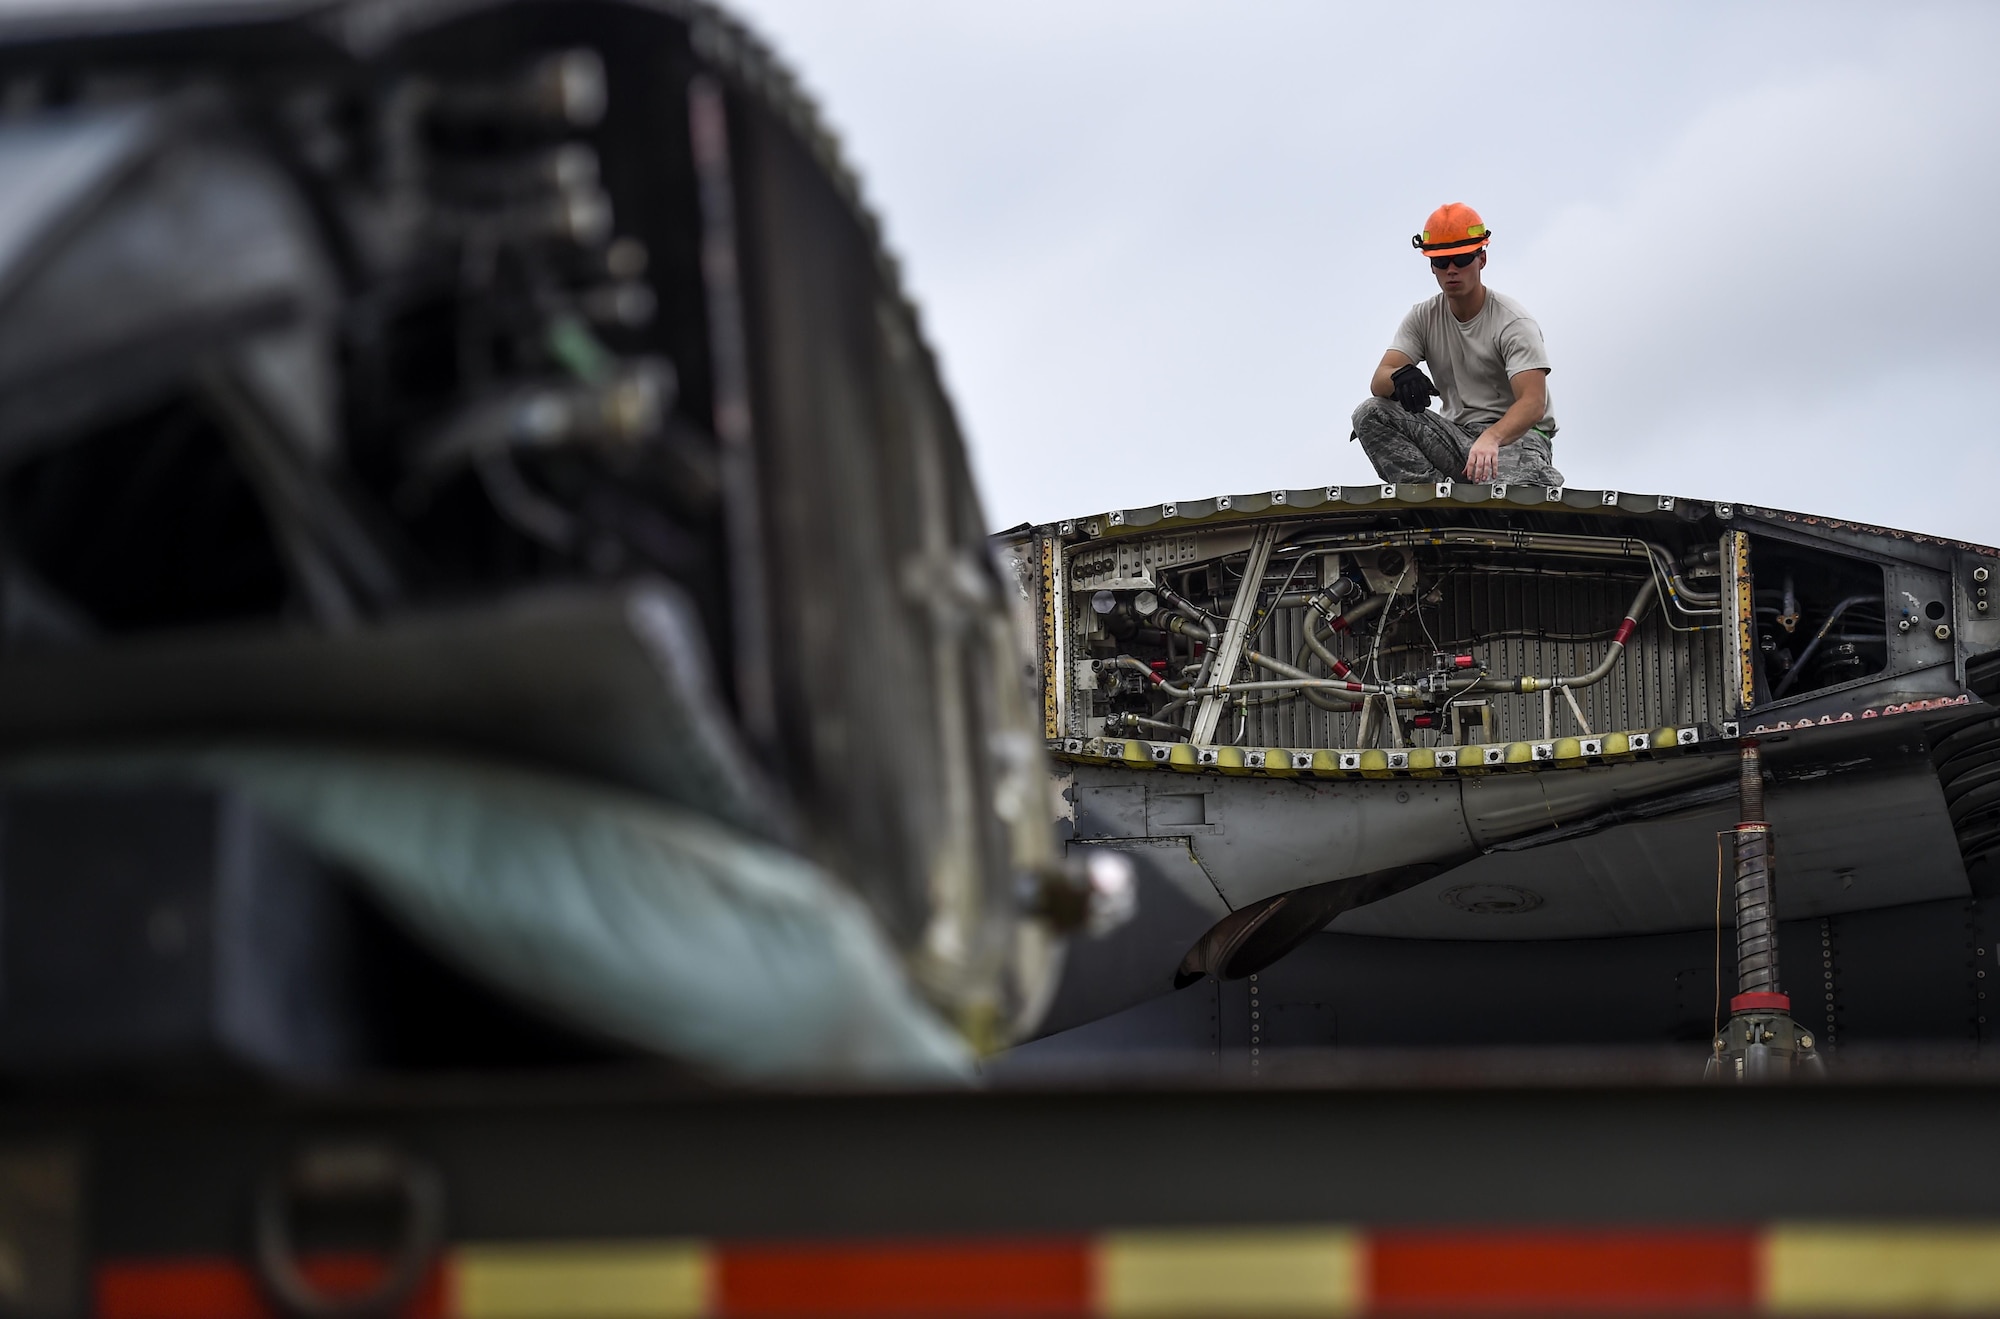 An Airman with the 402nd Expeditionary Depot Maintenance team, Robins Air Force Base, Ga., collects tools after Airmen remove a wing from an MC-130P Combat Shadow at Hurlburt Field, Fla., August 5, 2015. Wing removal enabled the MC-130P to be towed safely from the flightline to the Hurlburt Field Air Park Aug. 15, 2015.  (U.S. Air Force photo by Airman Kai White/Released)